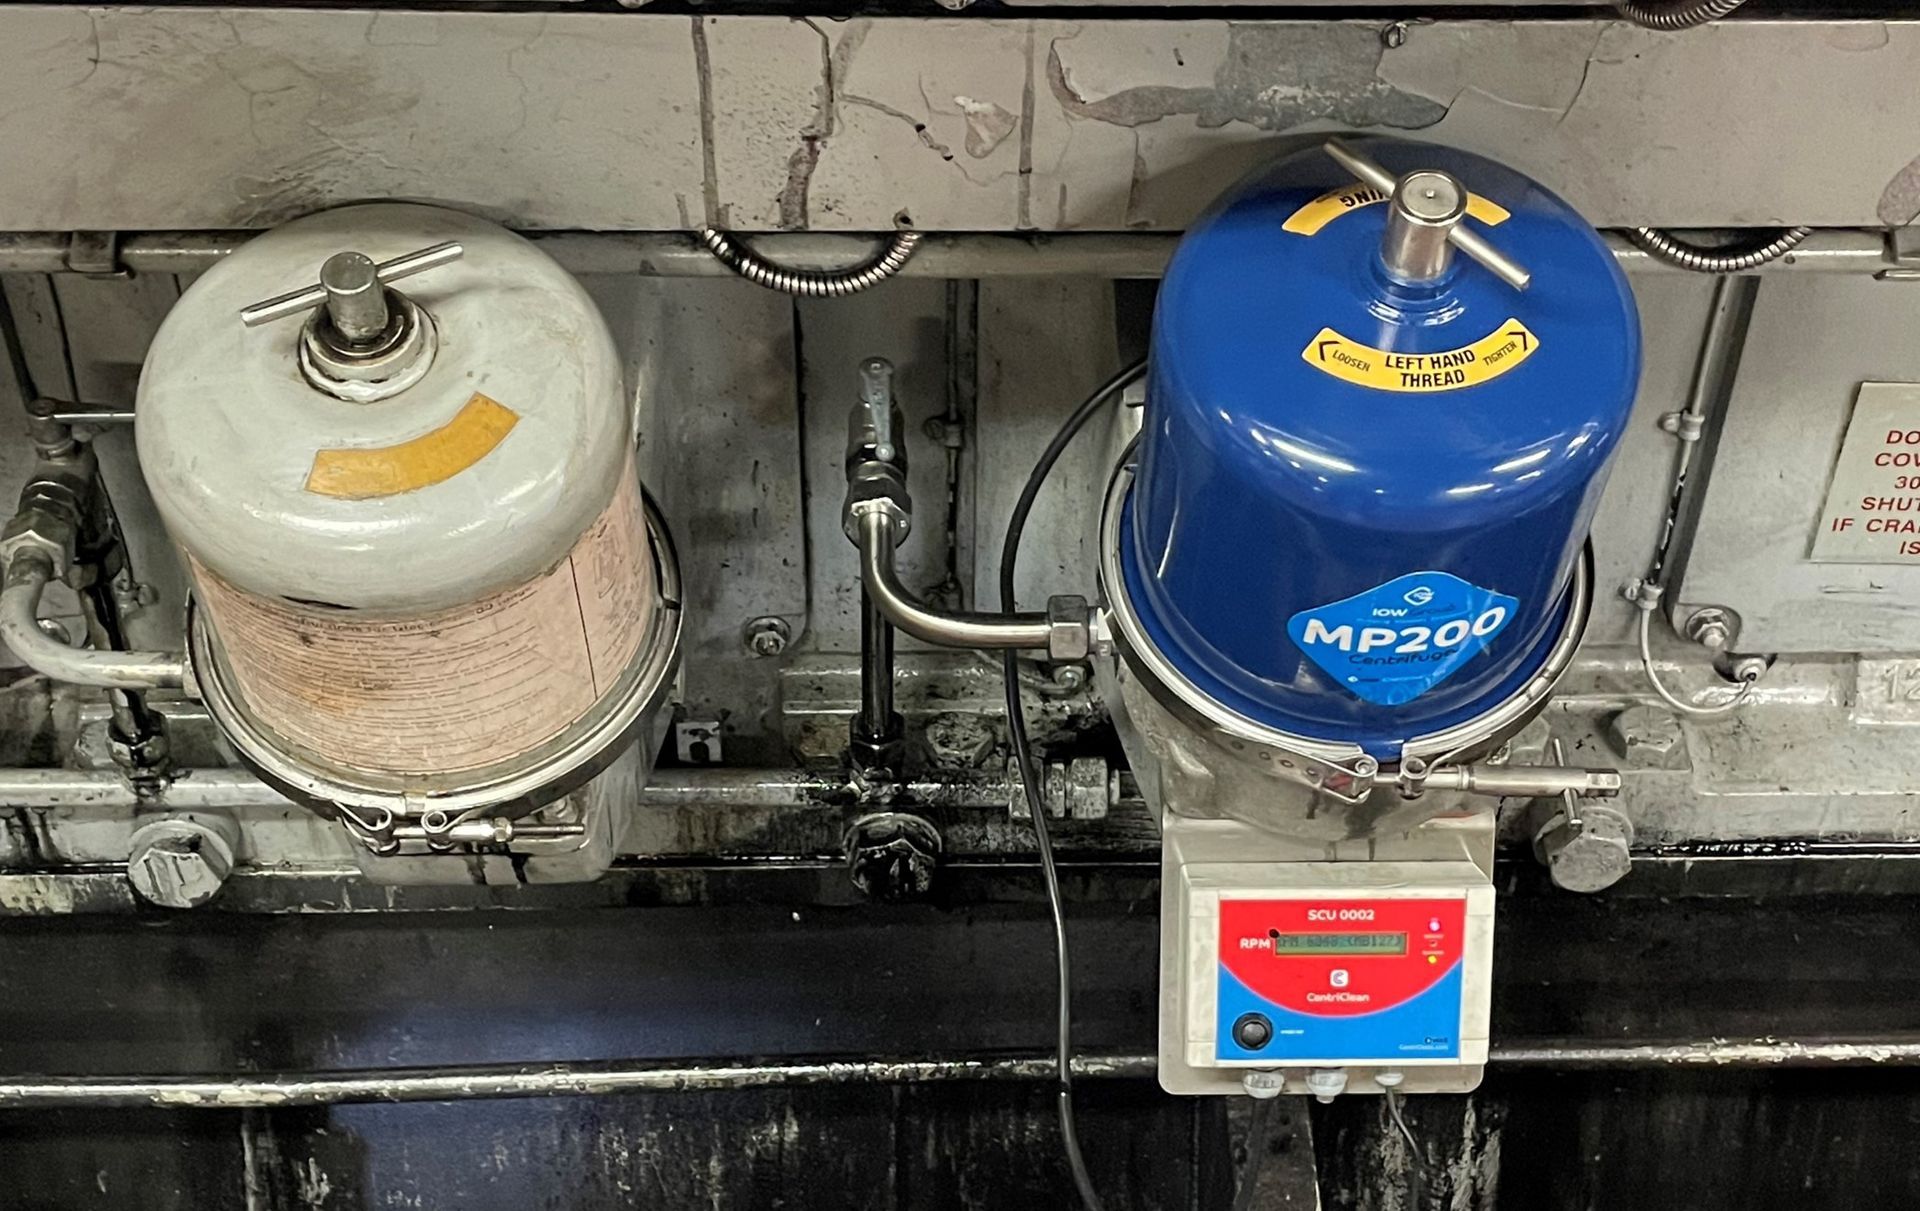 Glacier GF200 and IOW MP200 Centrifuges mounted side-by-side onto a Wartsila diesel engine